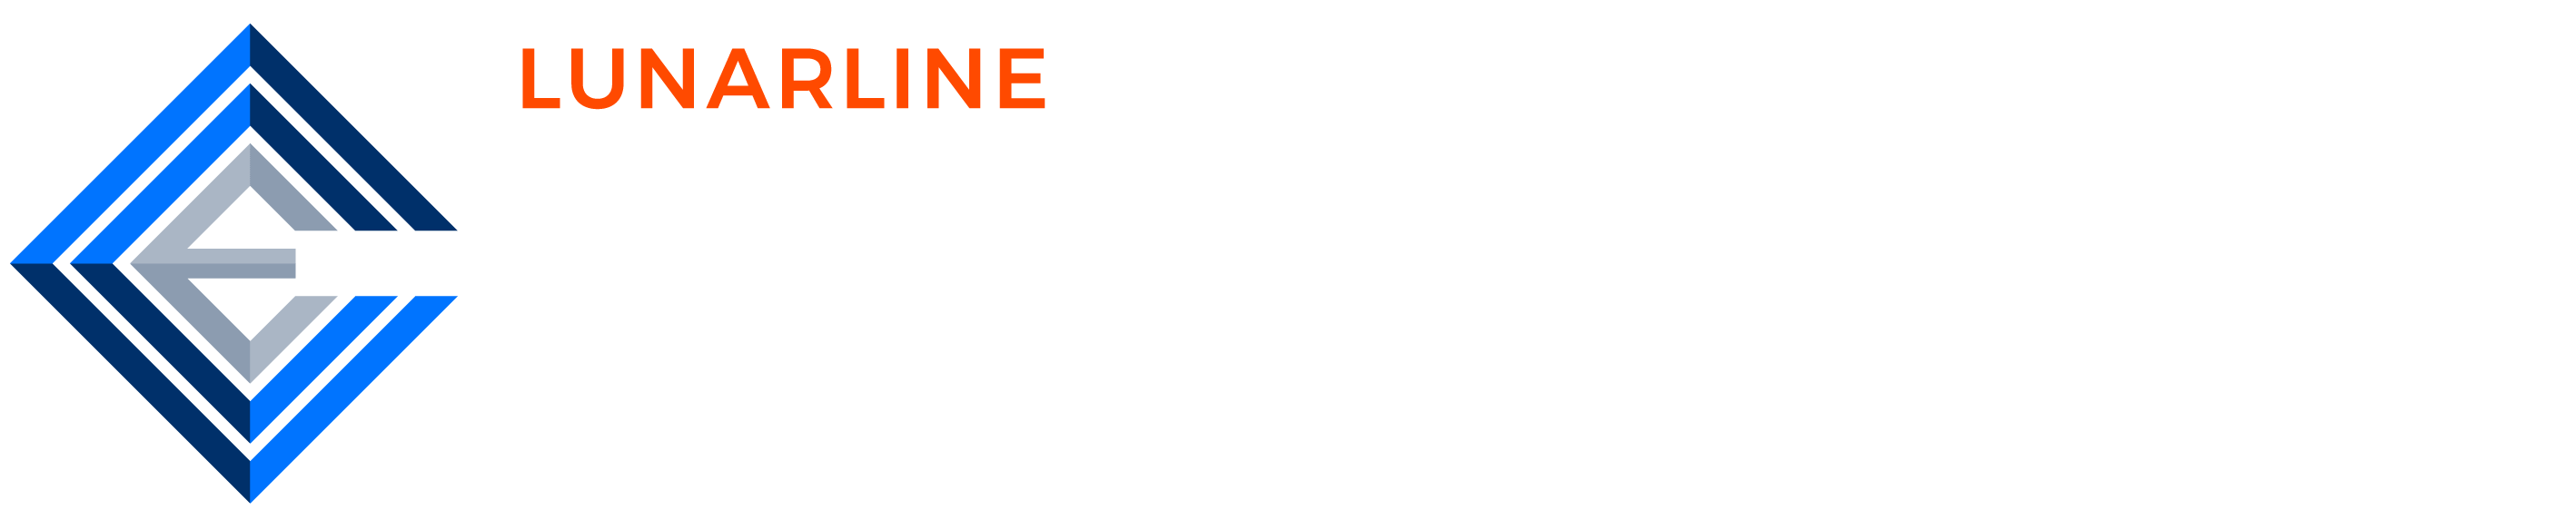 Cyber Certified Experts CCE